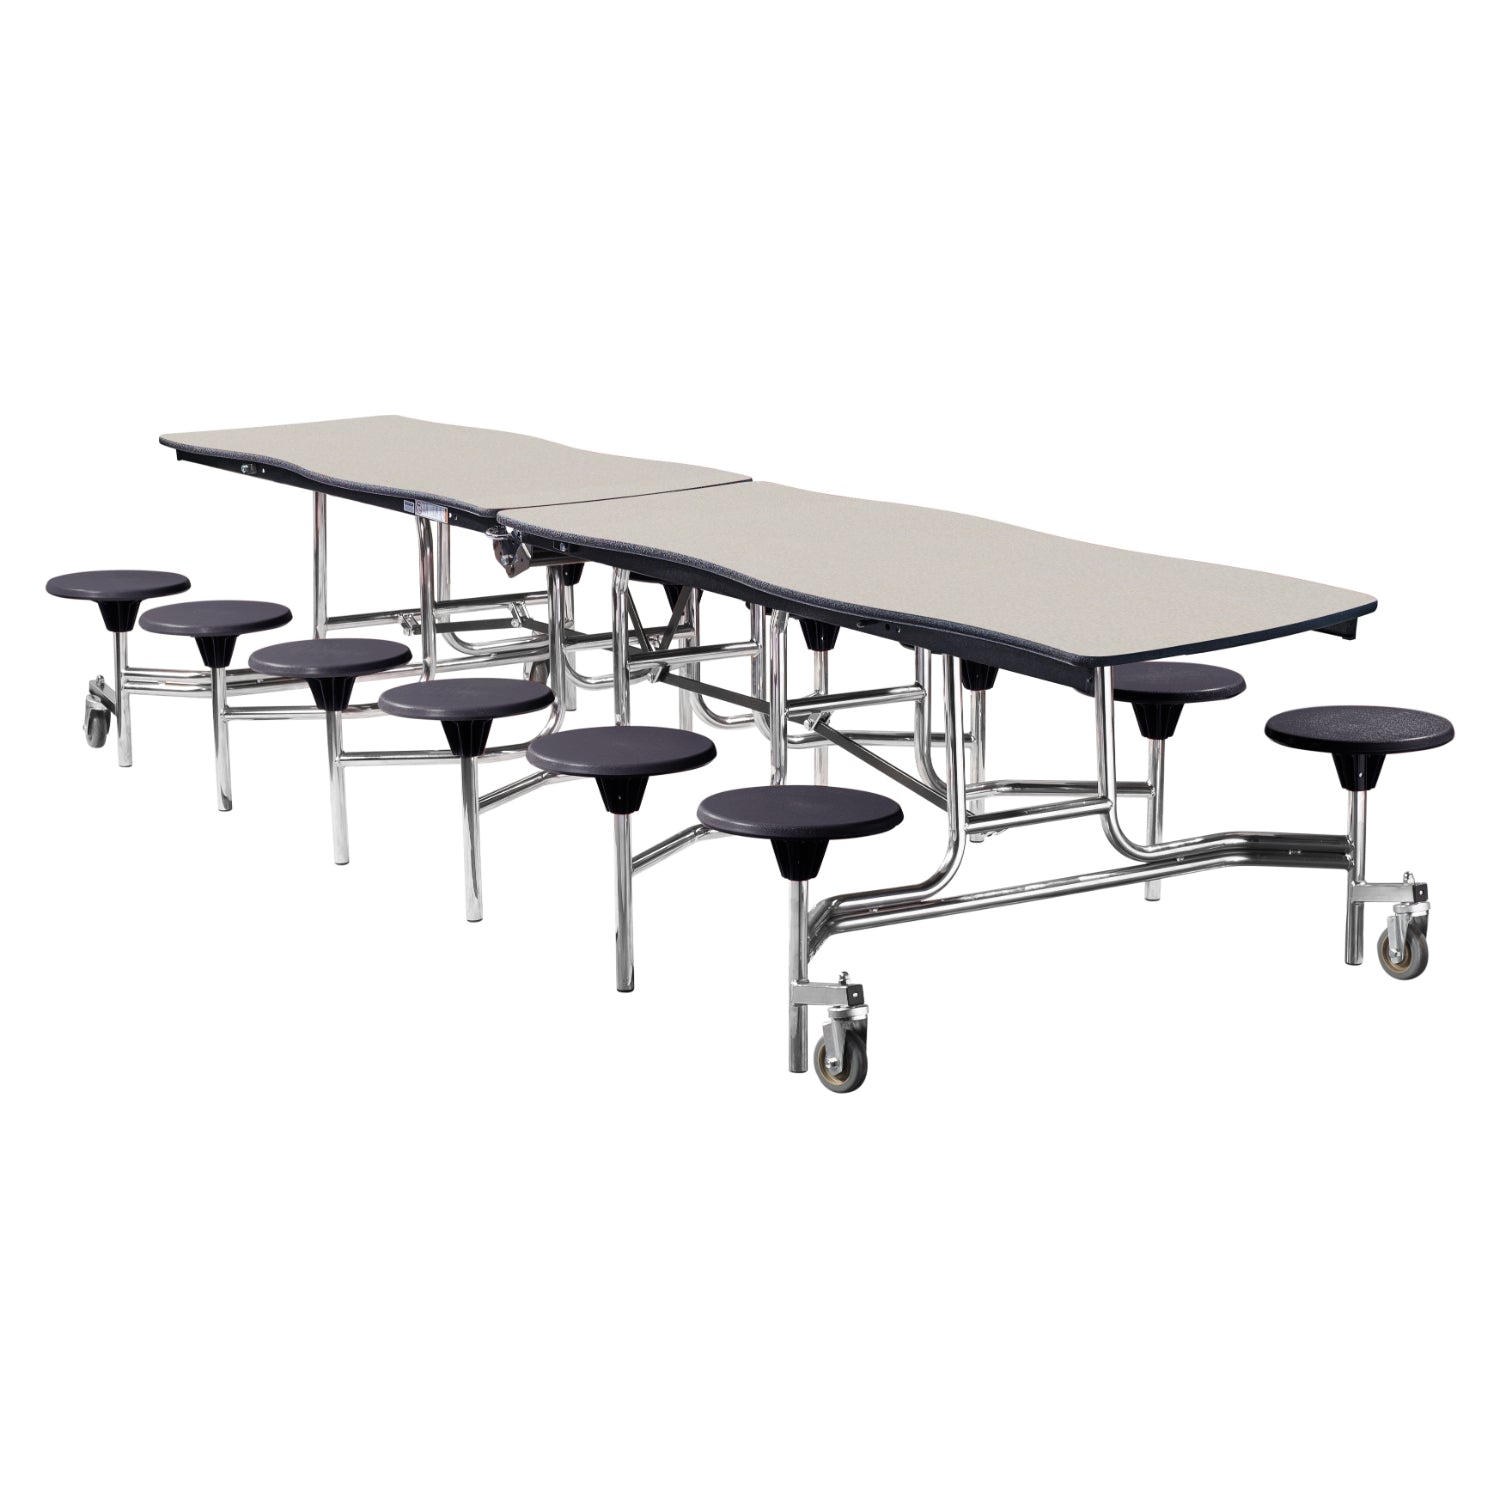 Mobile Cafeteria Table with 12 Stools, 12' Swerve, MDF Core, Black ProtectEdge, Chrome Frame